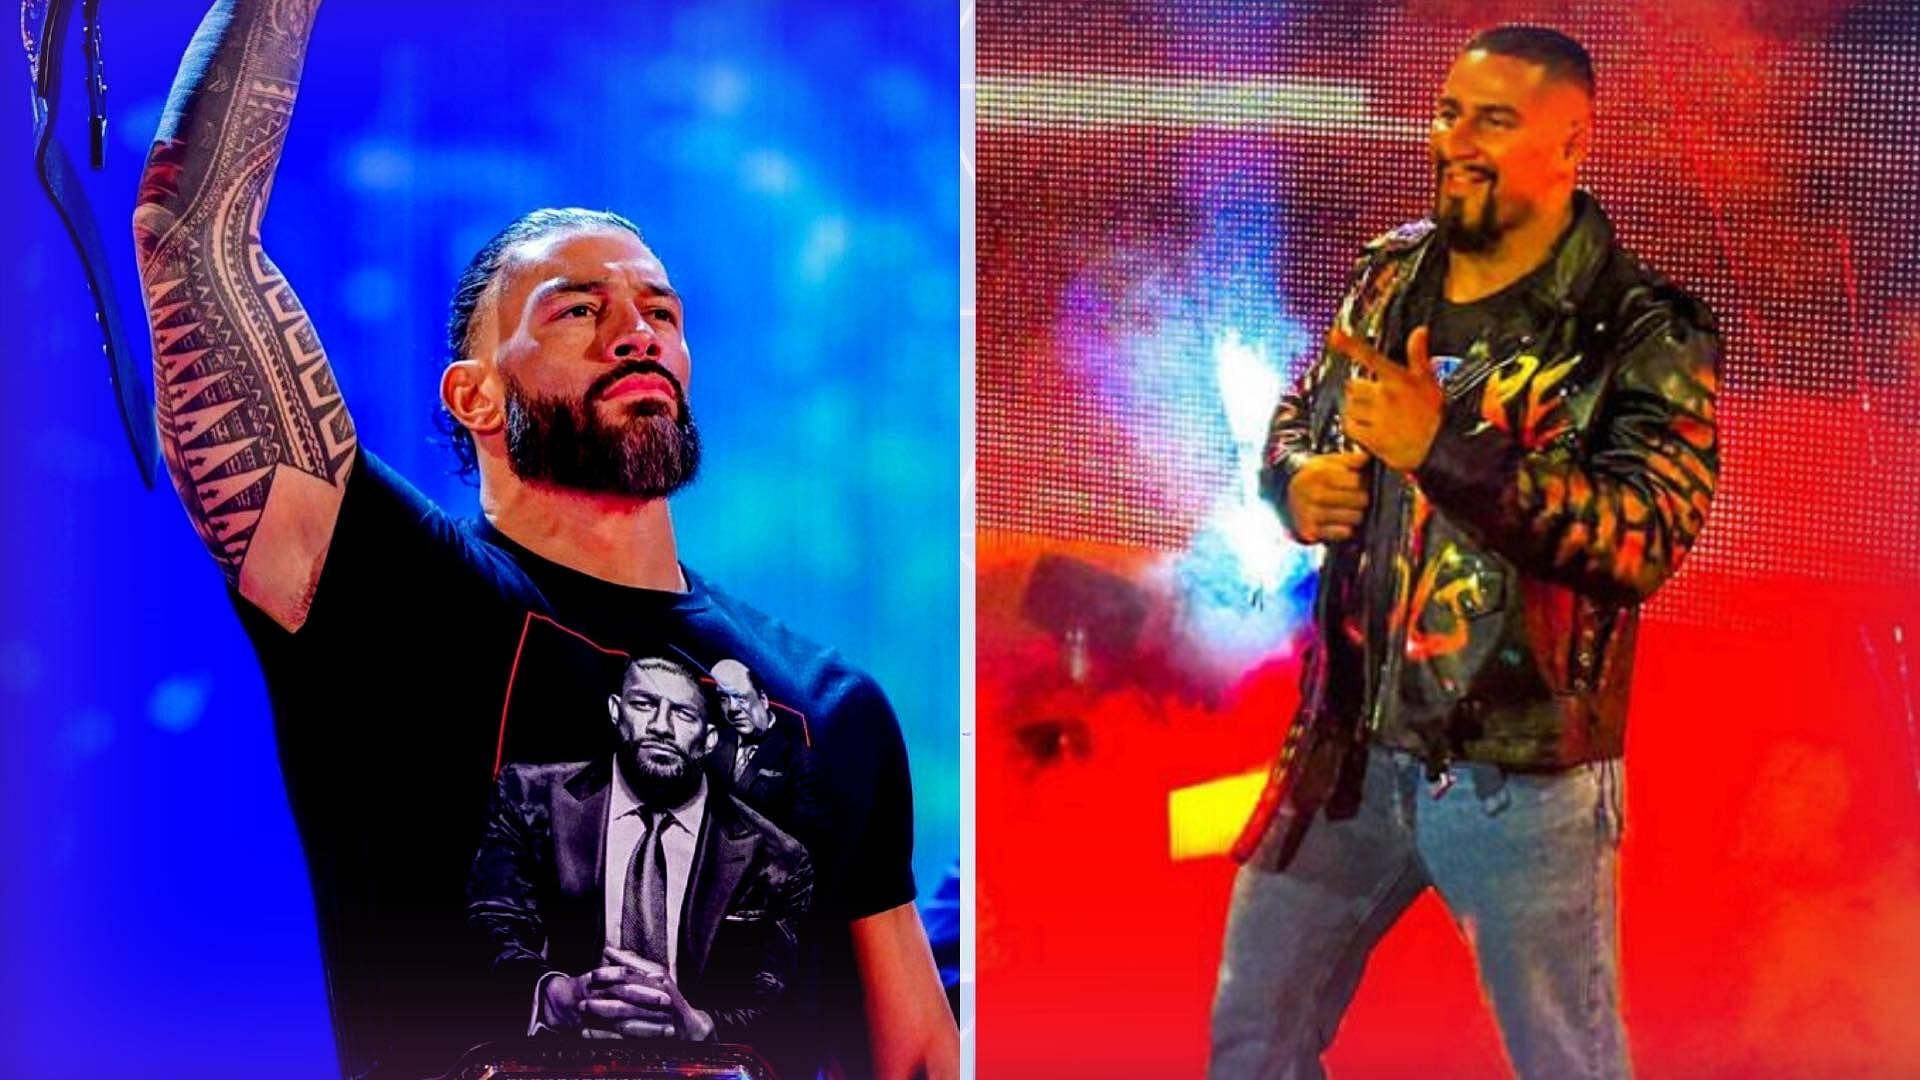 Top stable to replace The Bloodline, former main roster star to return to SmackDown - 5 NXT Superstars who could step up in Roman Reigns' absence